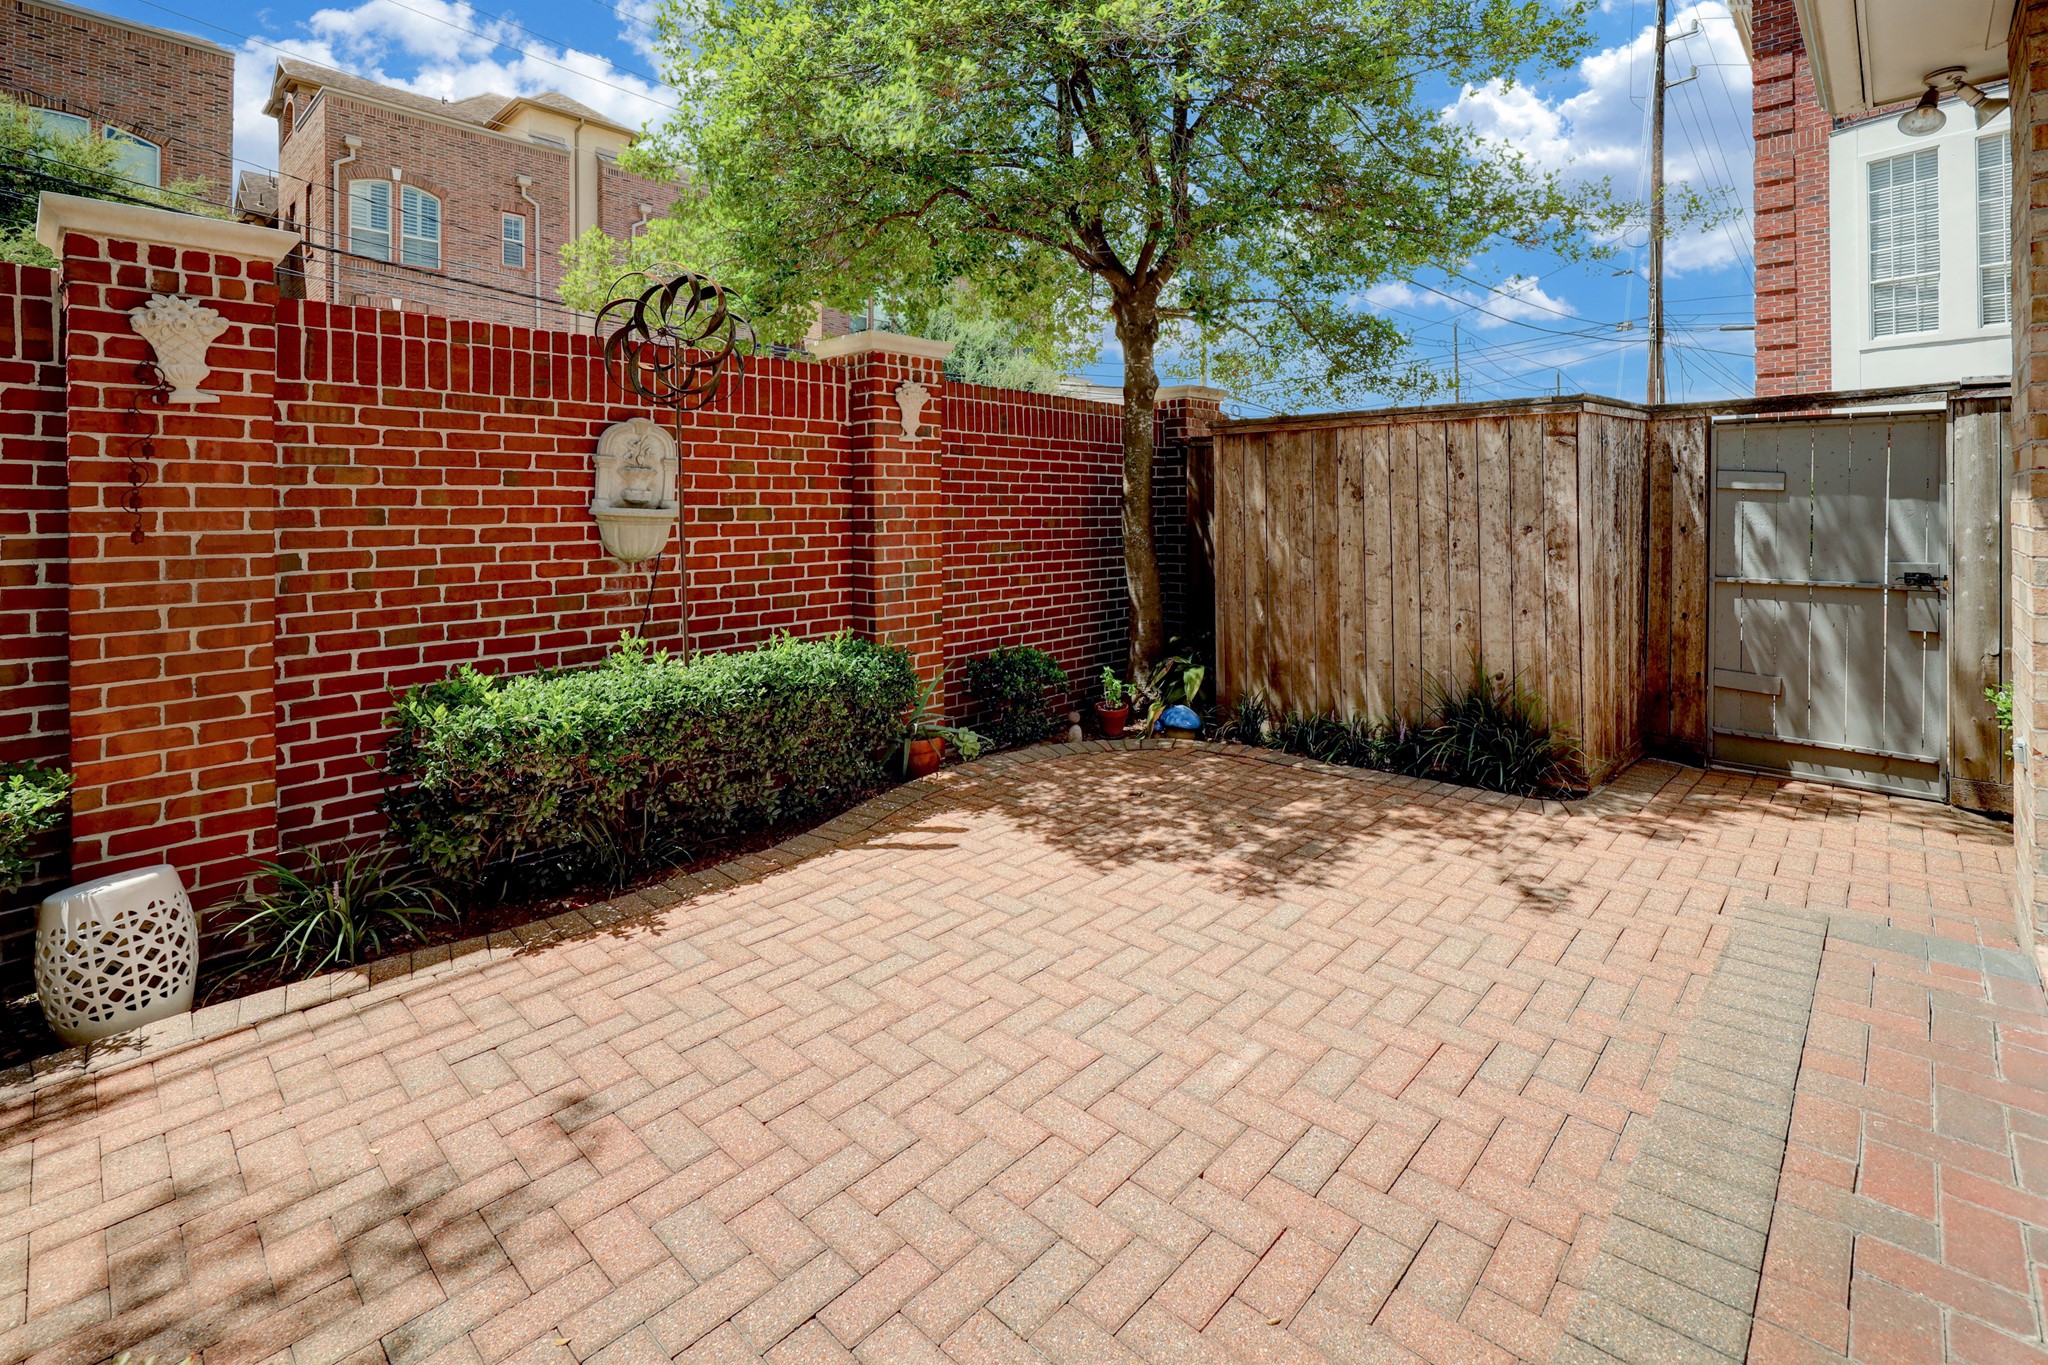 The rear wall of the patio is attractive red brick.